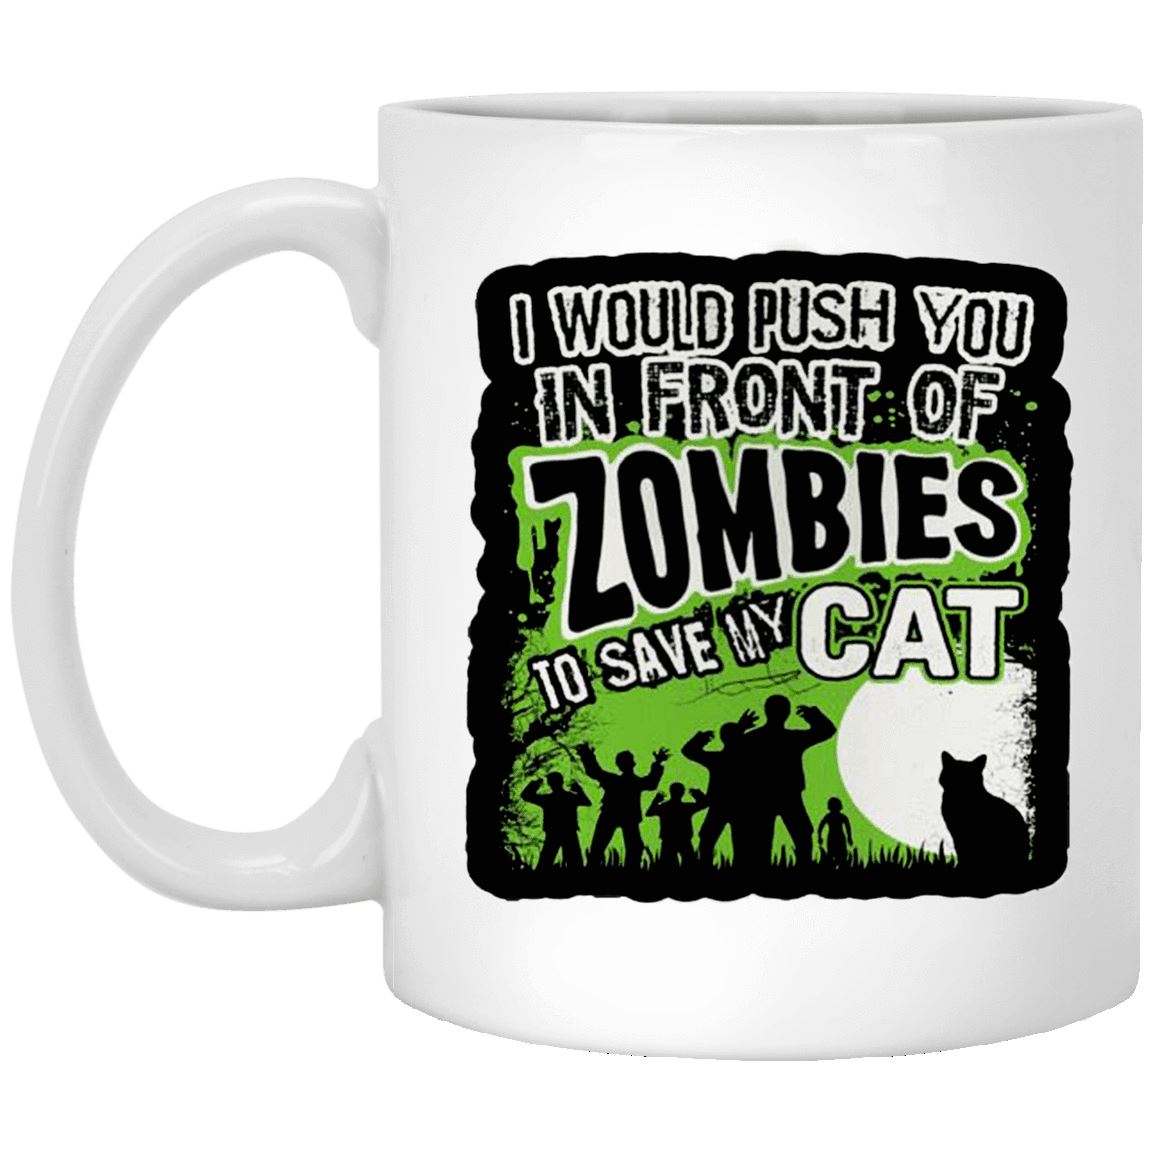 Cat Mug - I Would Push You In Font of Zombie To Save My Cat - CatsForLife